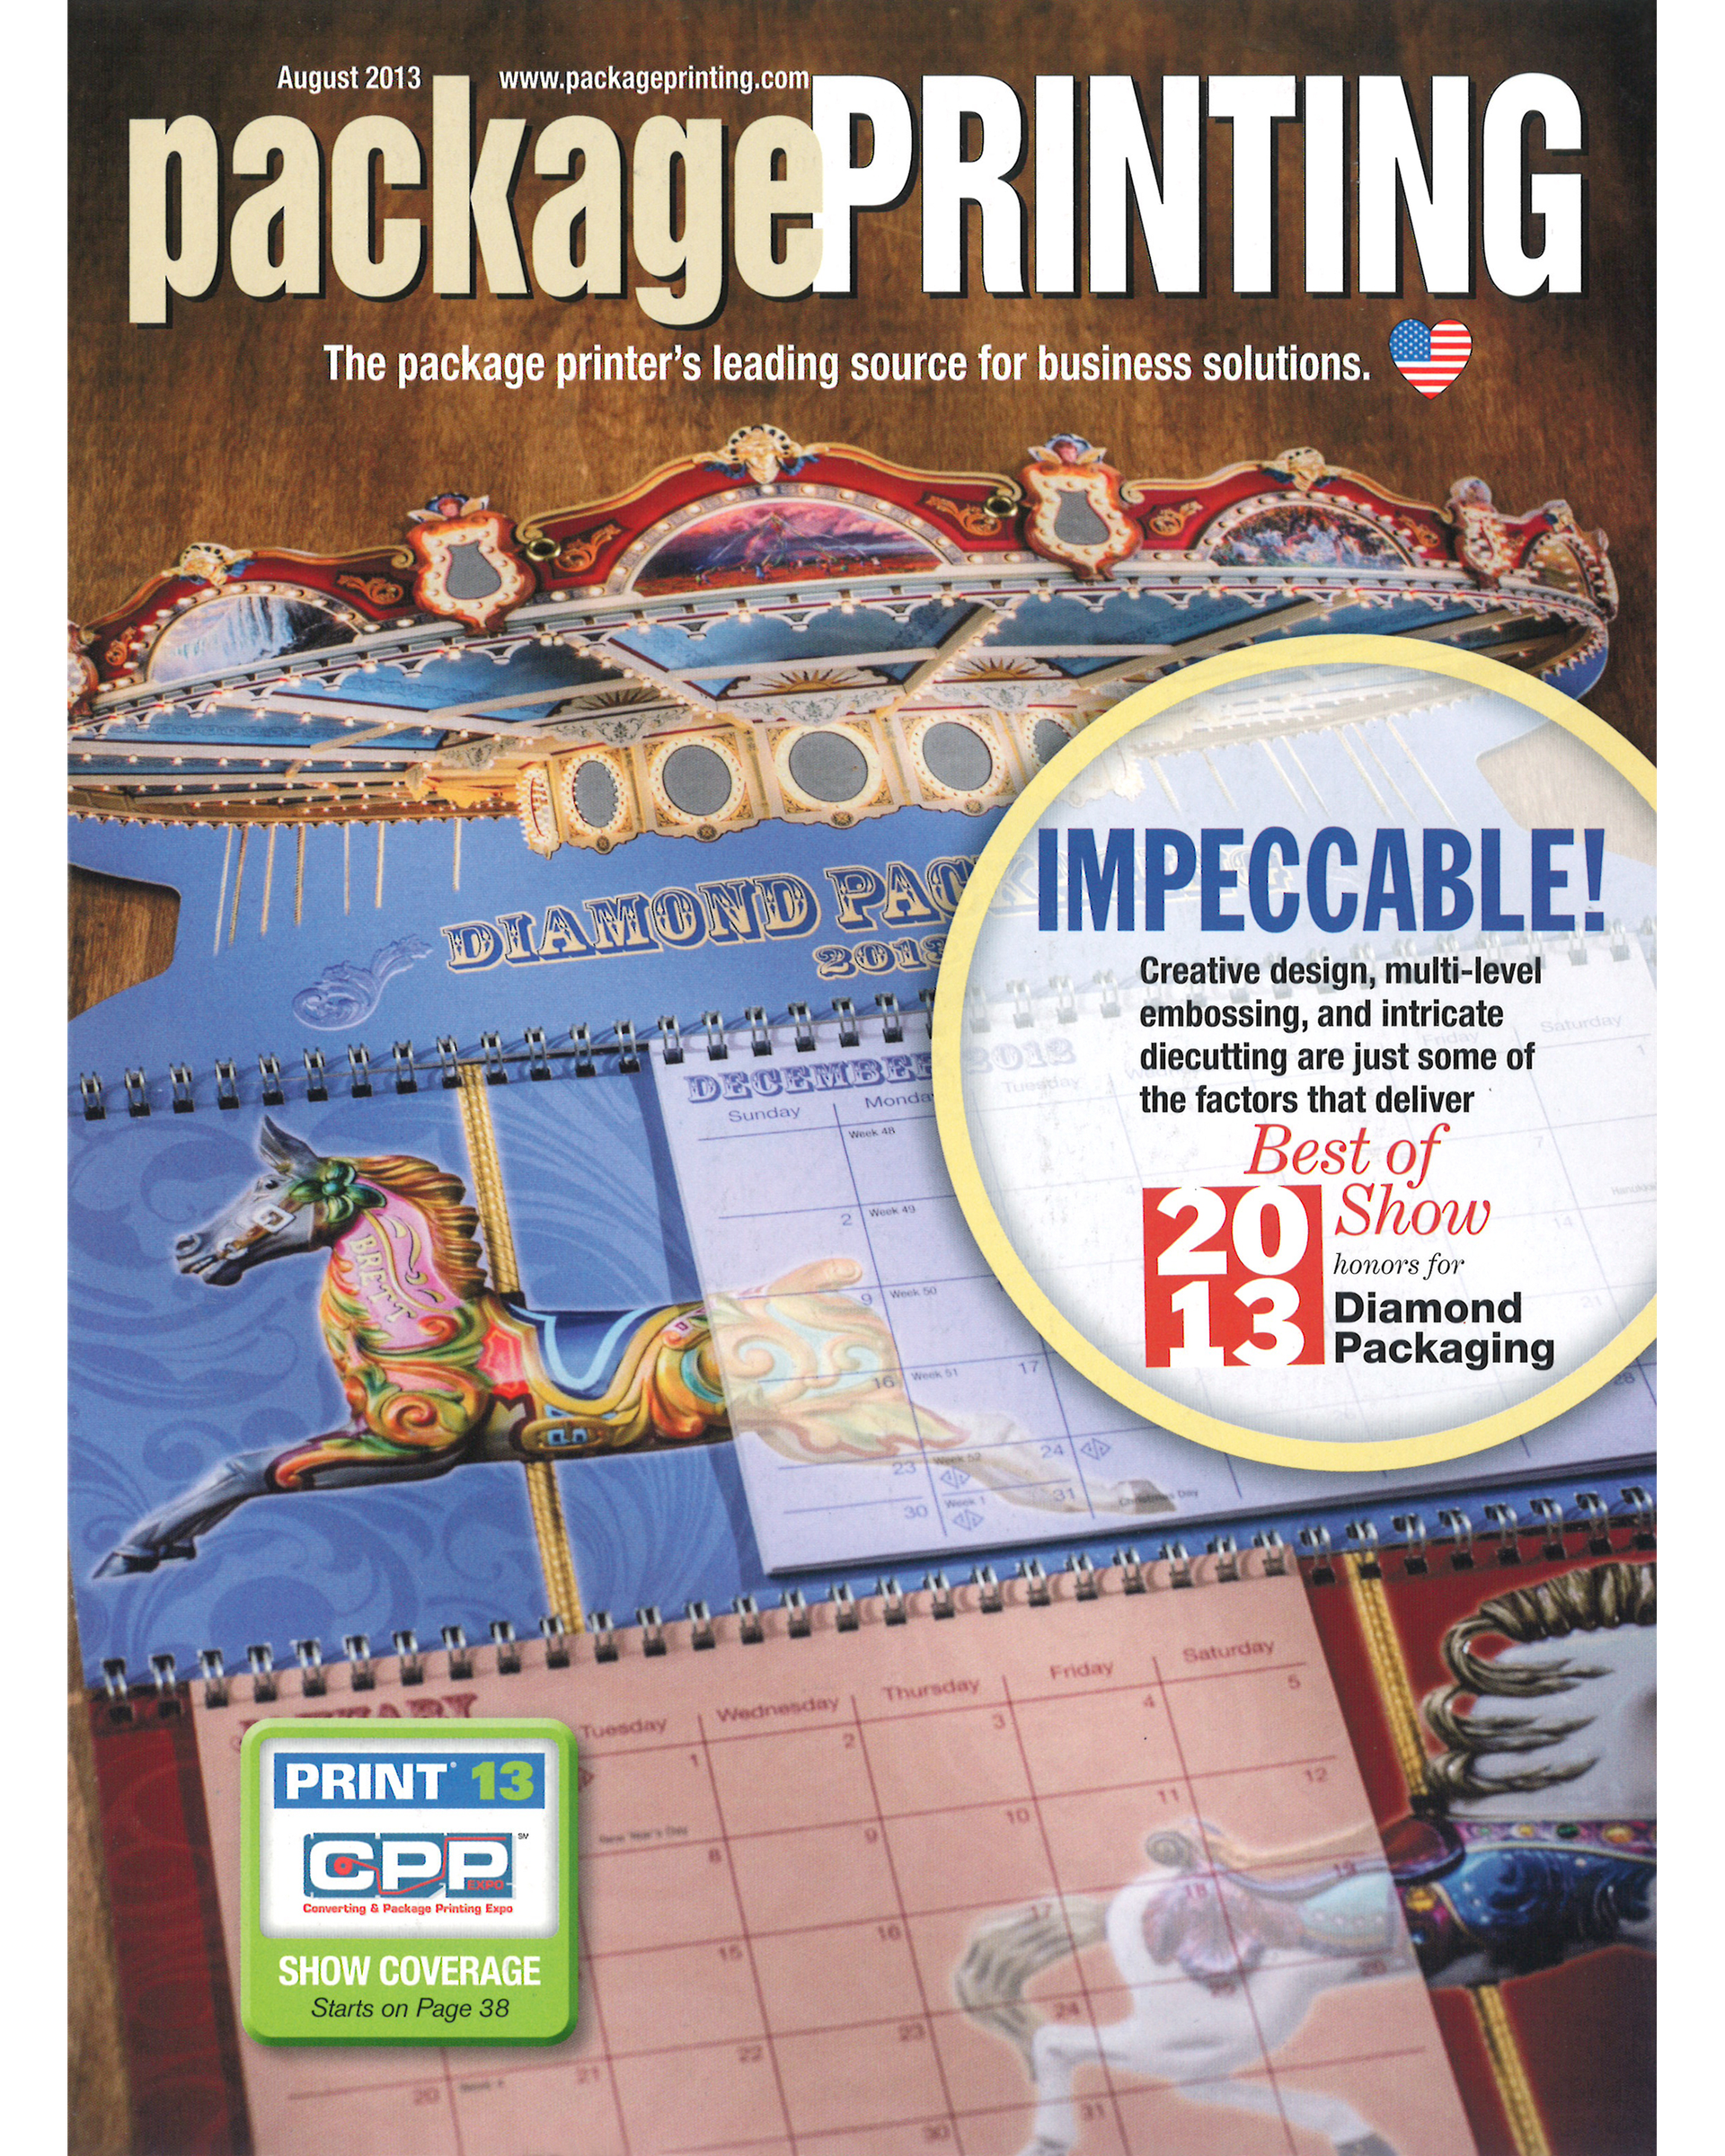 Diamond's Best of Show 2013 Calendar appears on the cover of packagePRINTING magazine.